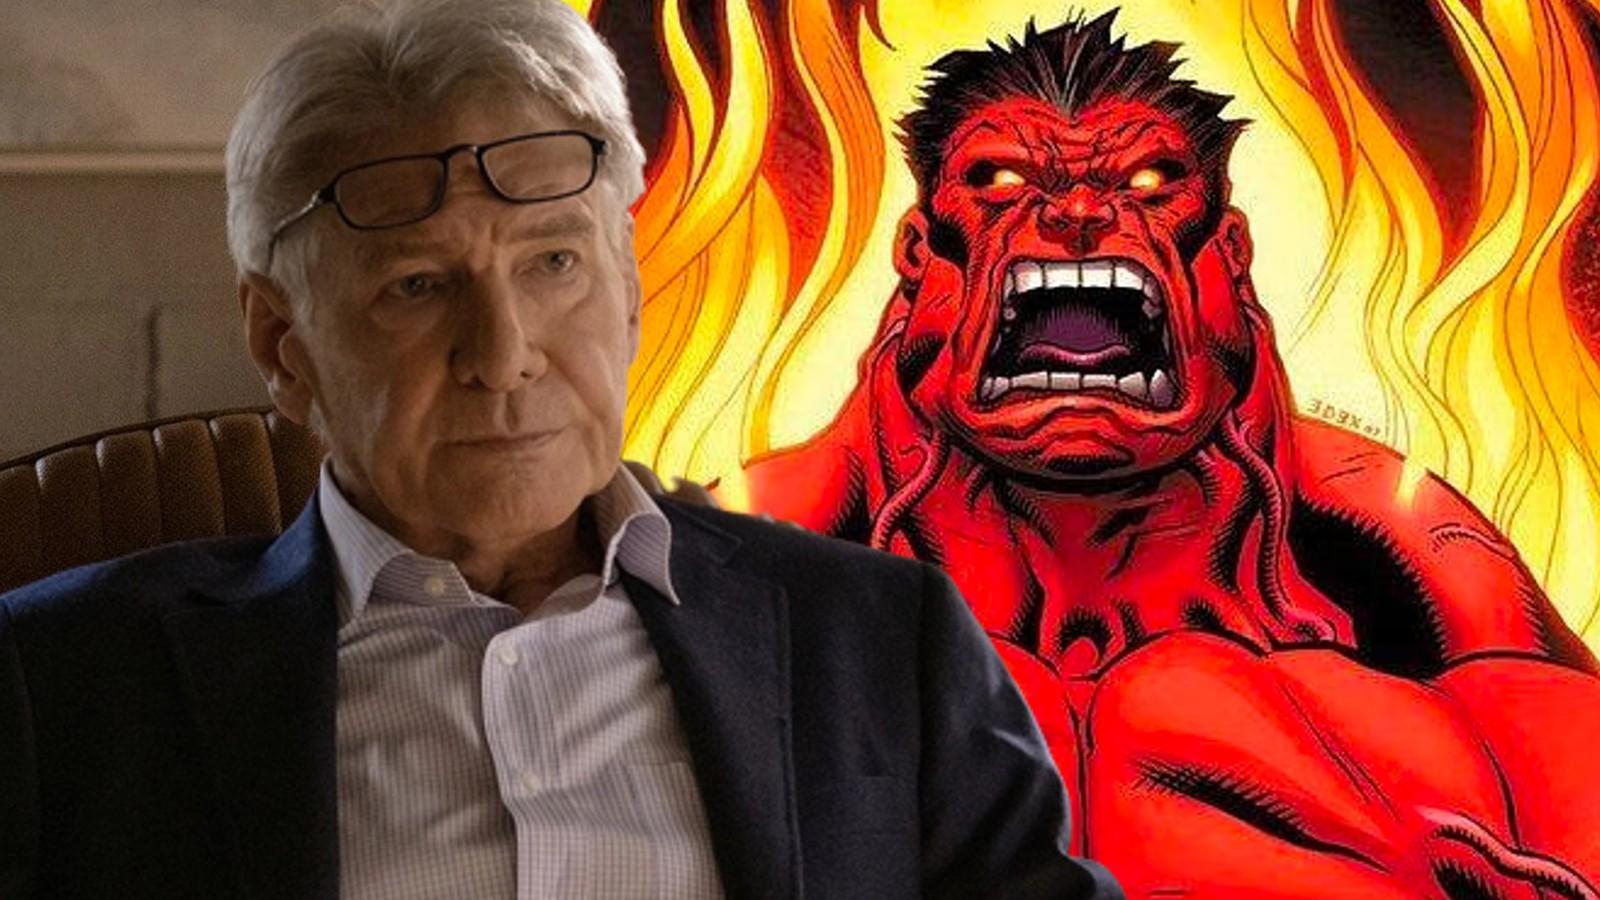 Harrison Ford and a still of Red Hulk in the Marvel Comics